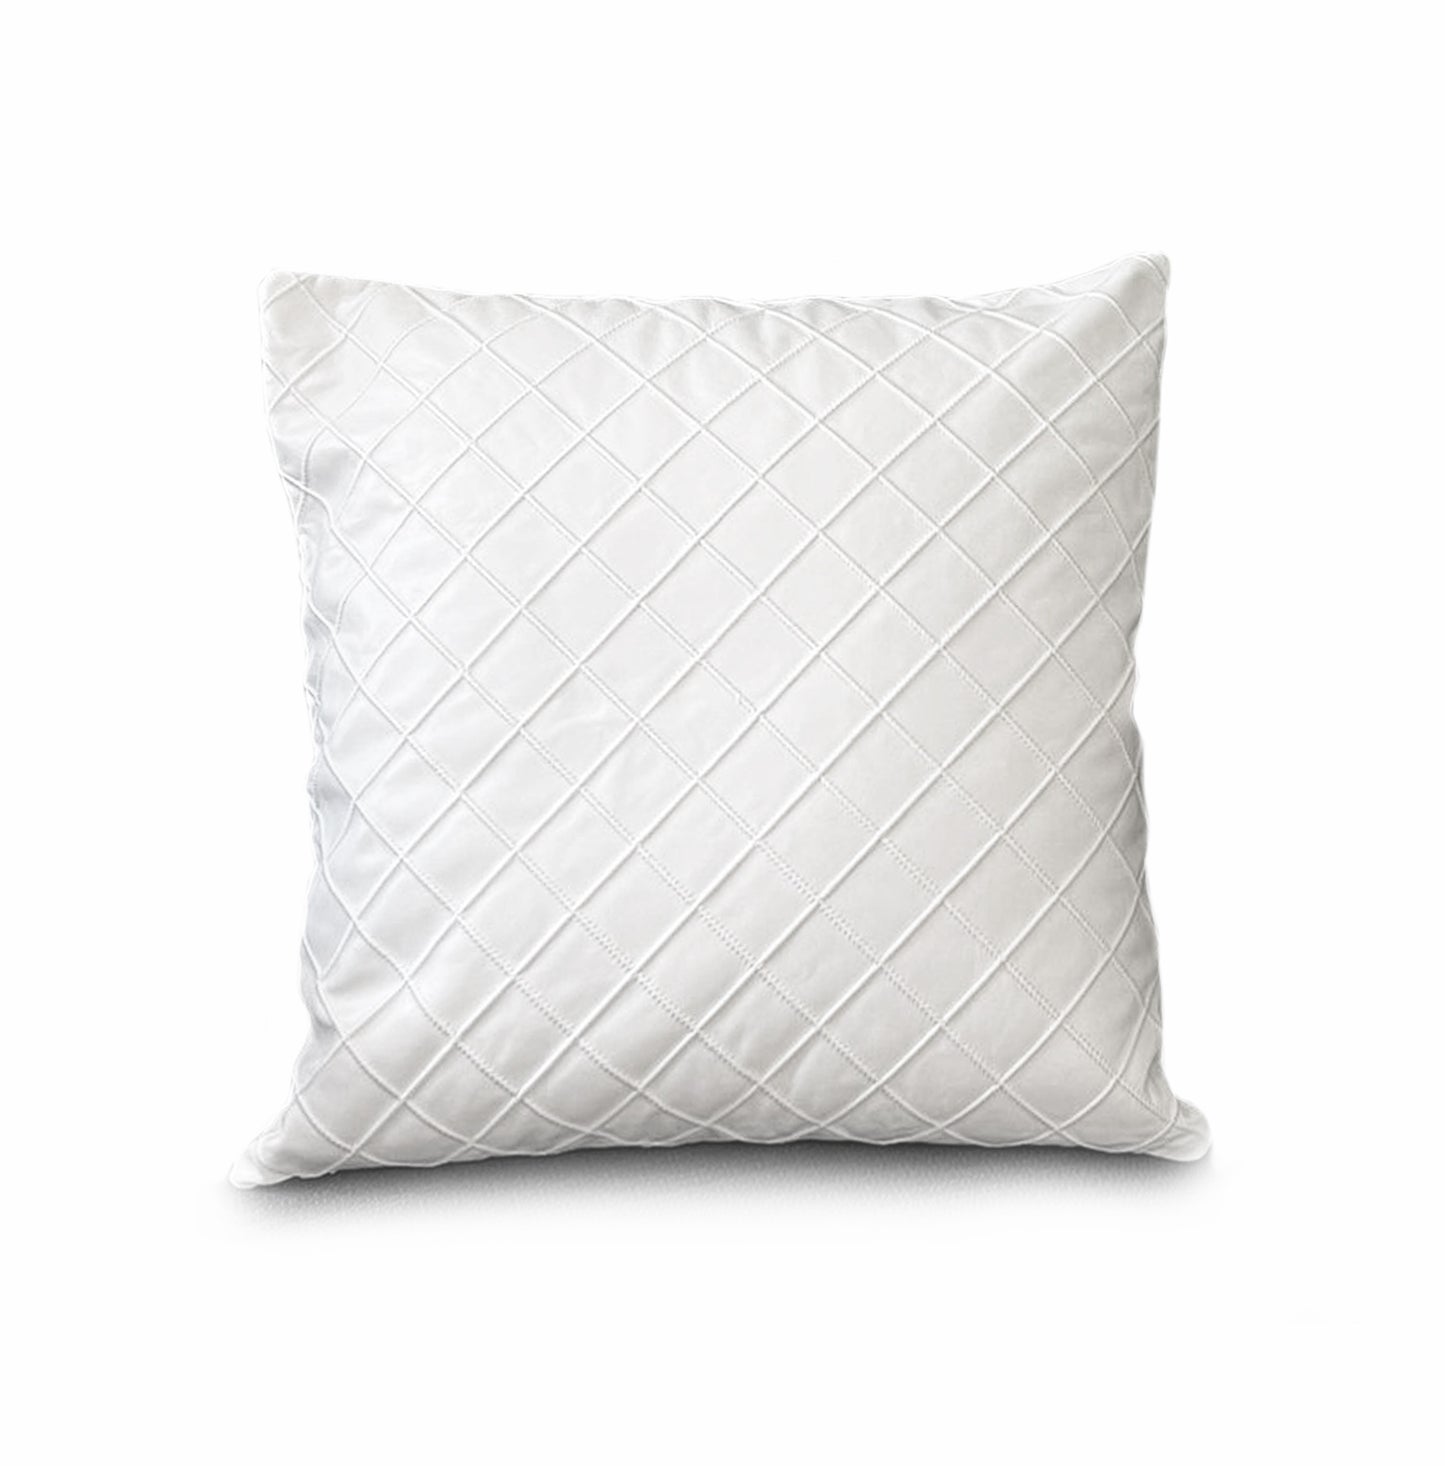 ST. BARTH LEATHER PILLOW CASE